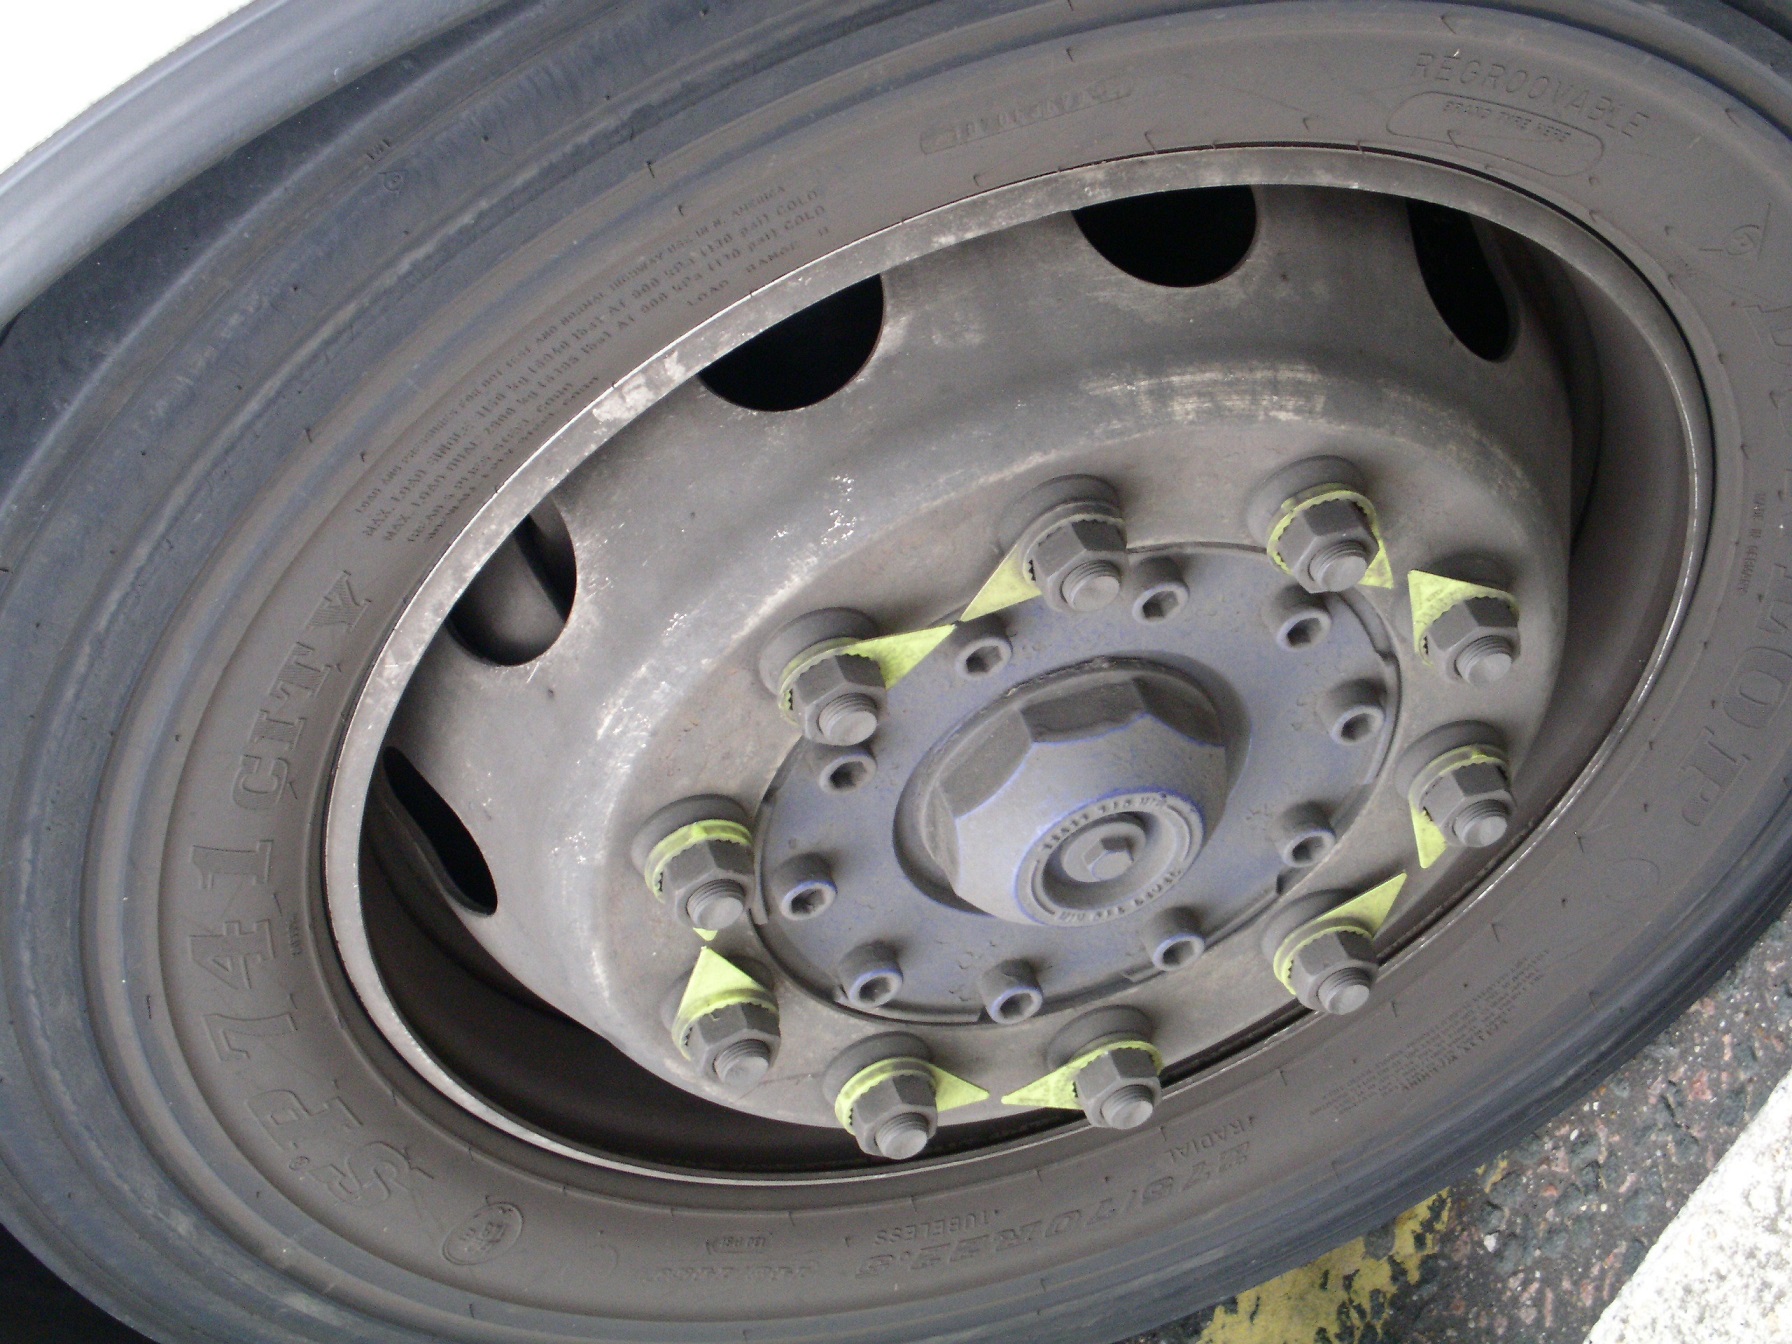 Tyre condition remains most common prohibition defect on PSV